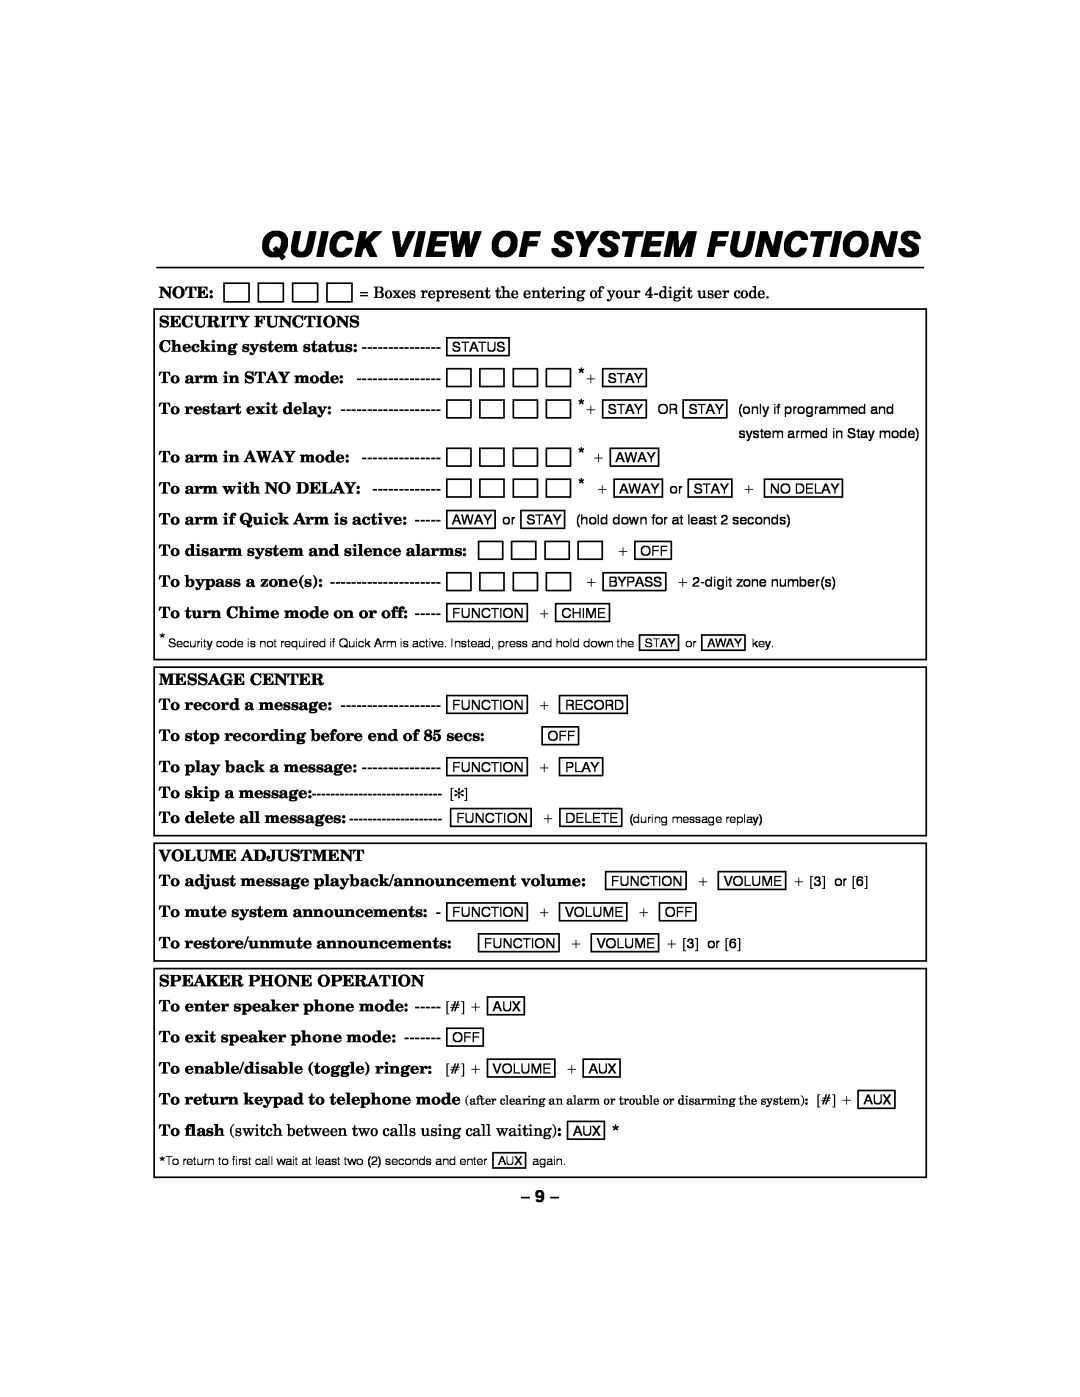 Honeywell LYNXR-I manual Quick View Of System Functions, Security Functions, Checking system status, To arm in STAY mode 